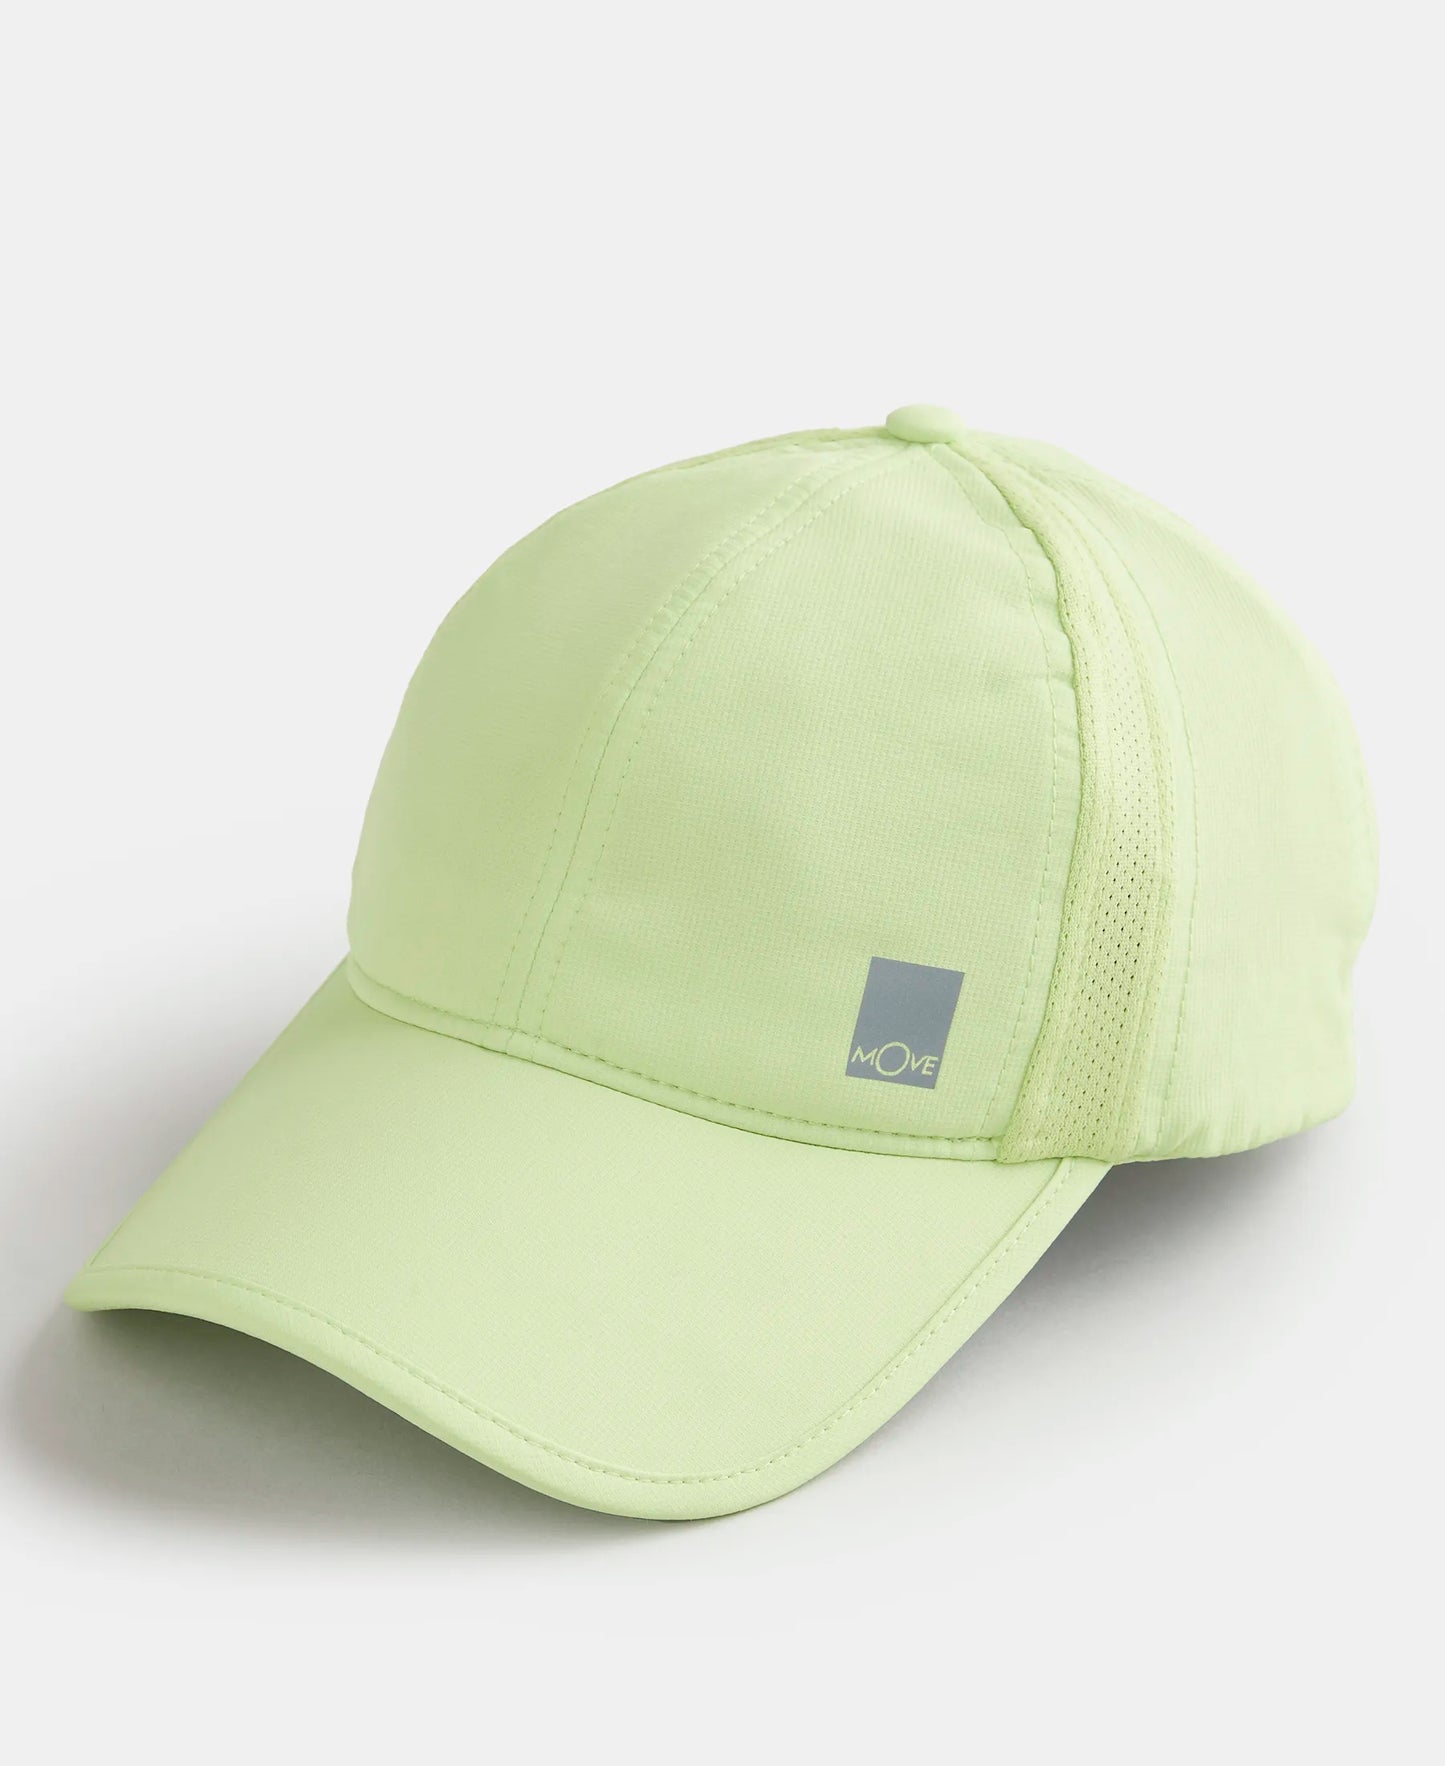 Polyester Solid Cap with Adjustable Back Closure and StayDry Technology - Green Glow-2